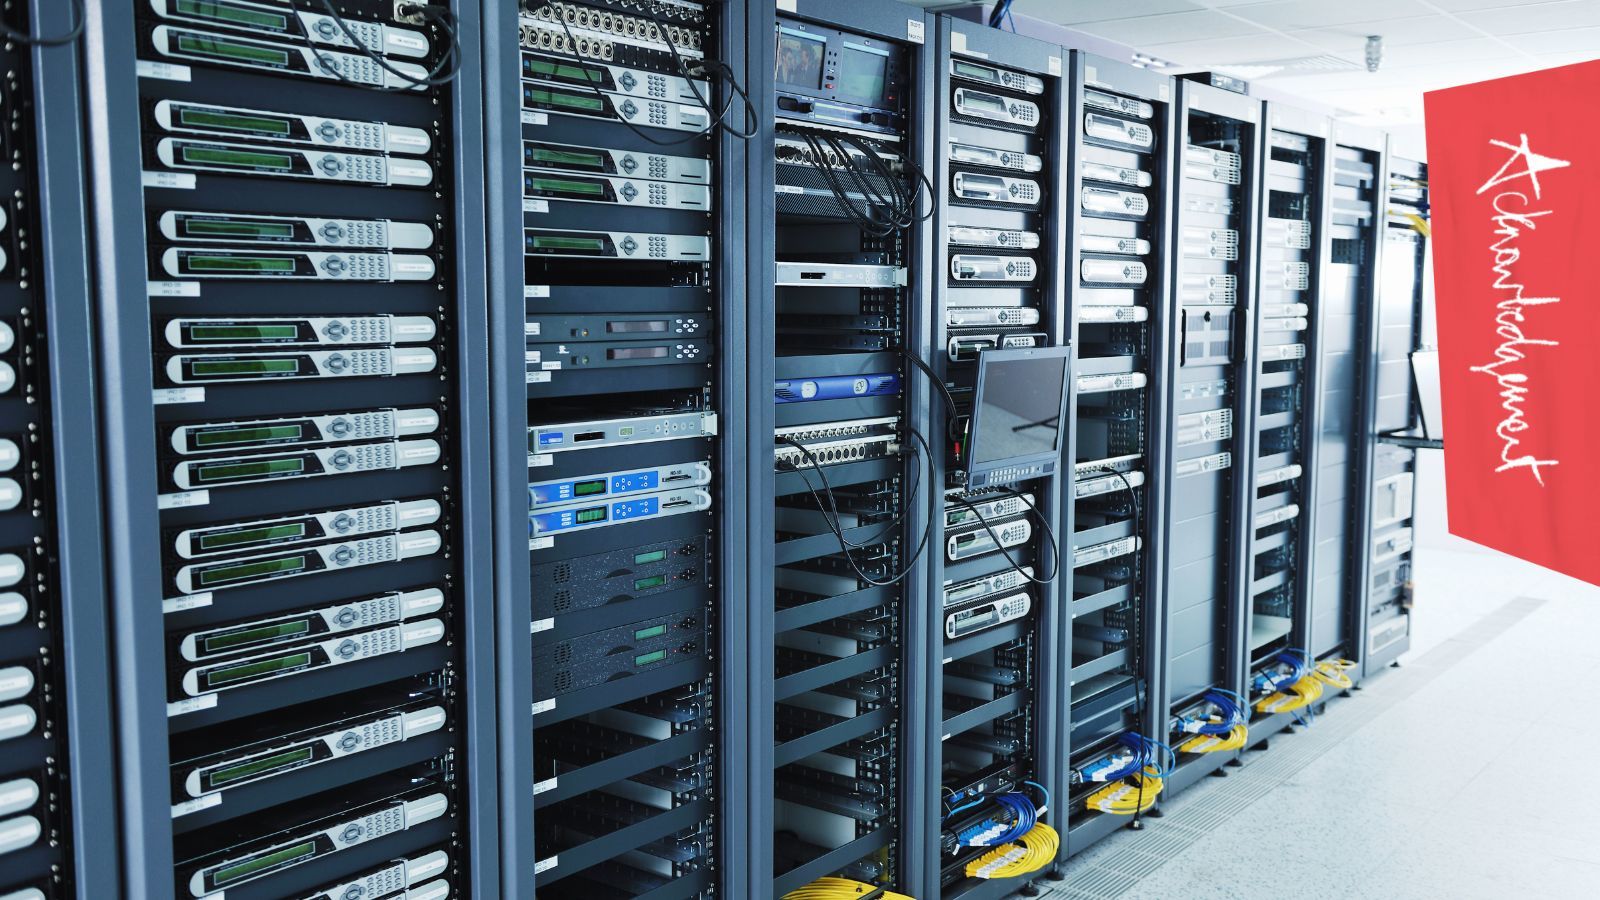 Servers in a data centre